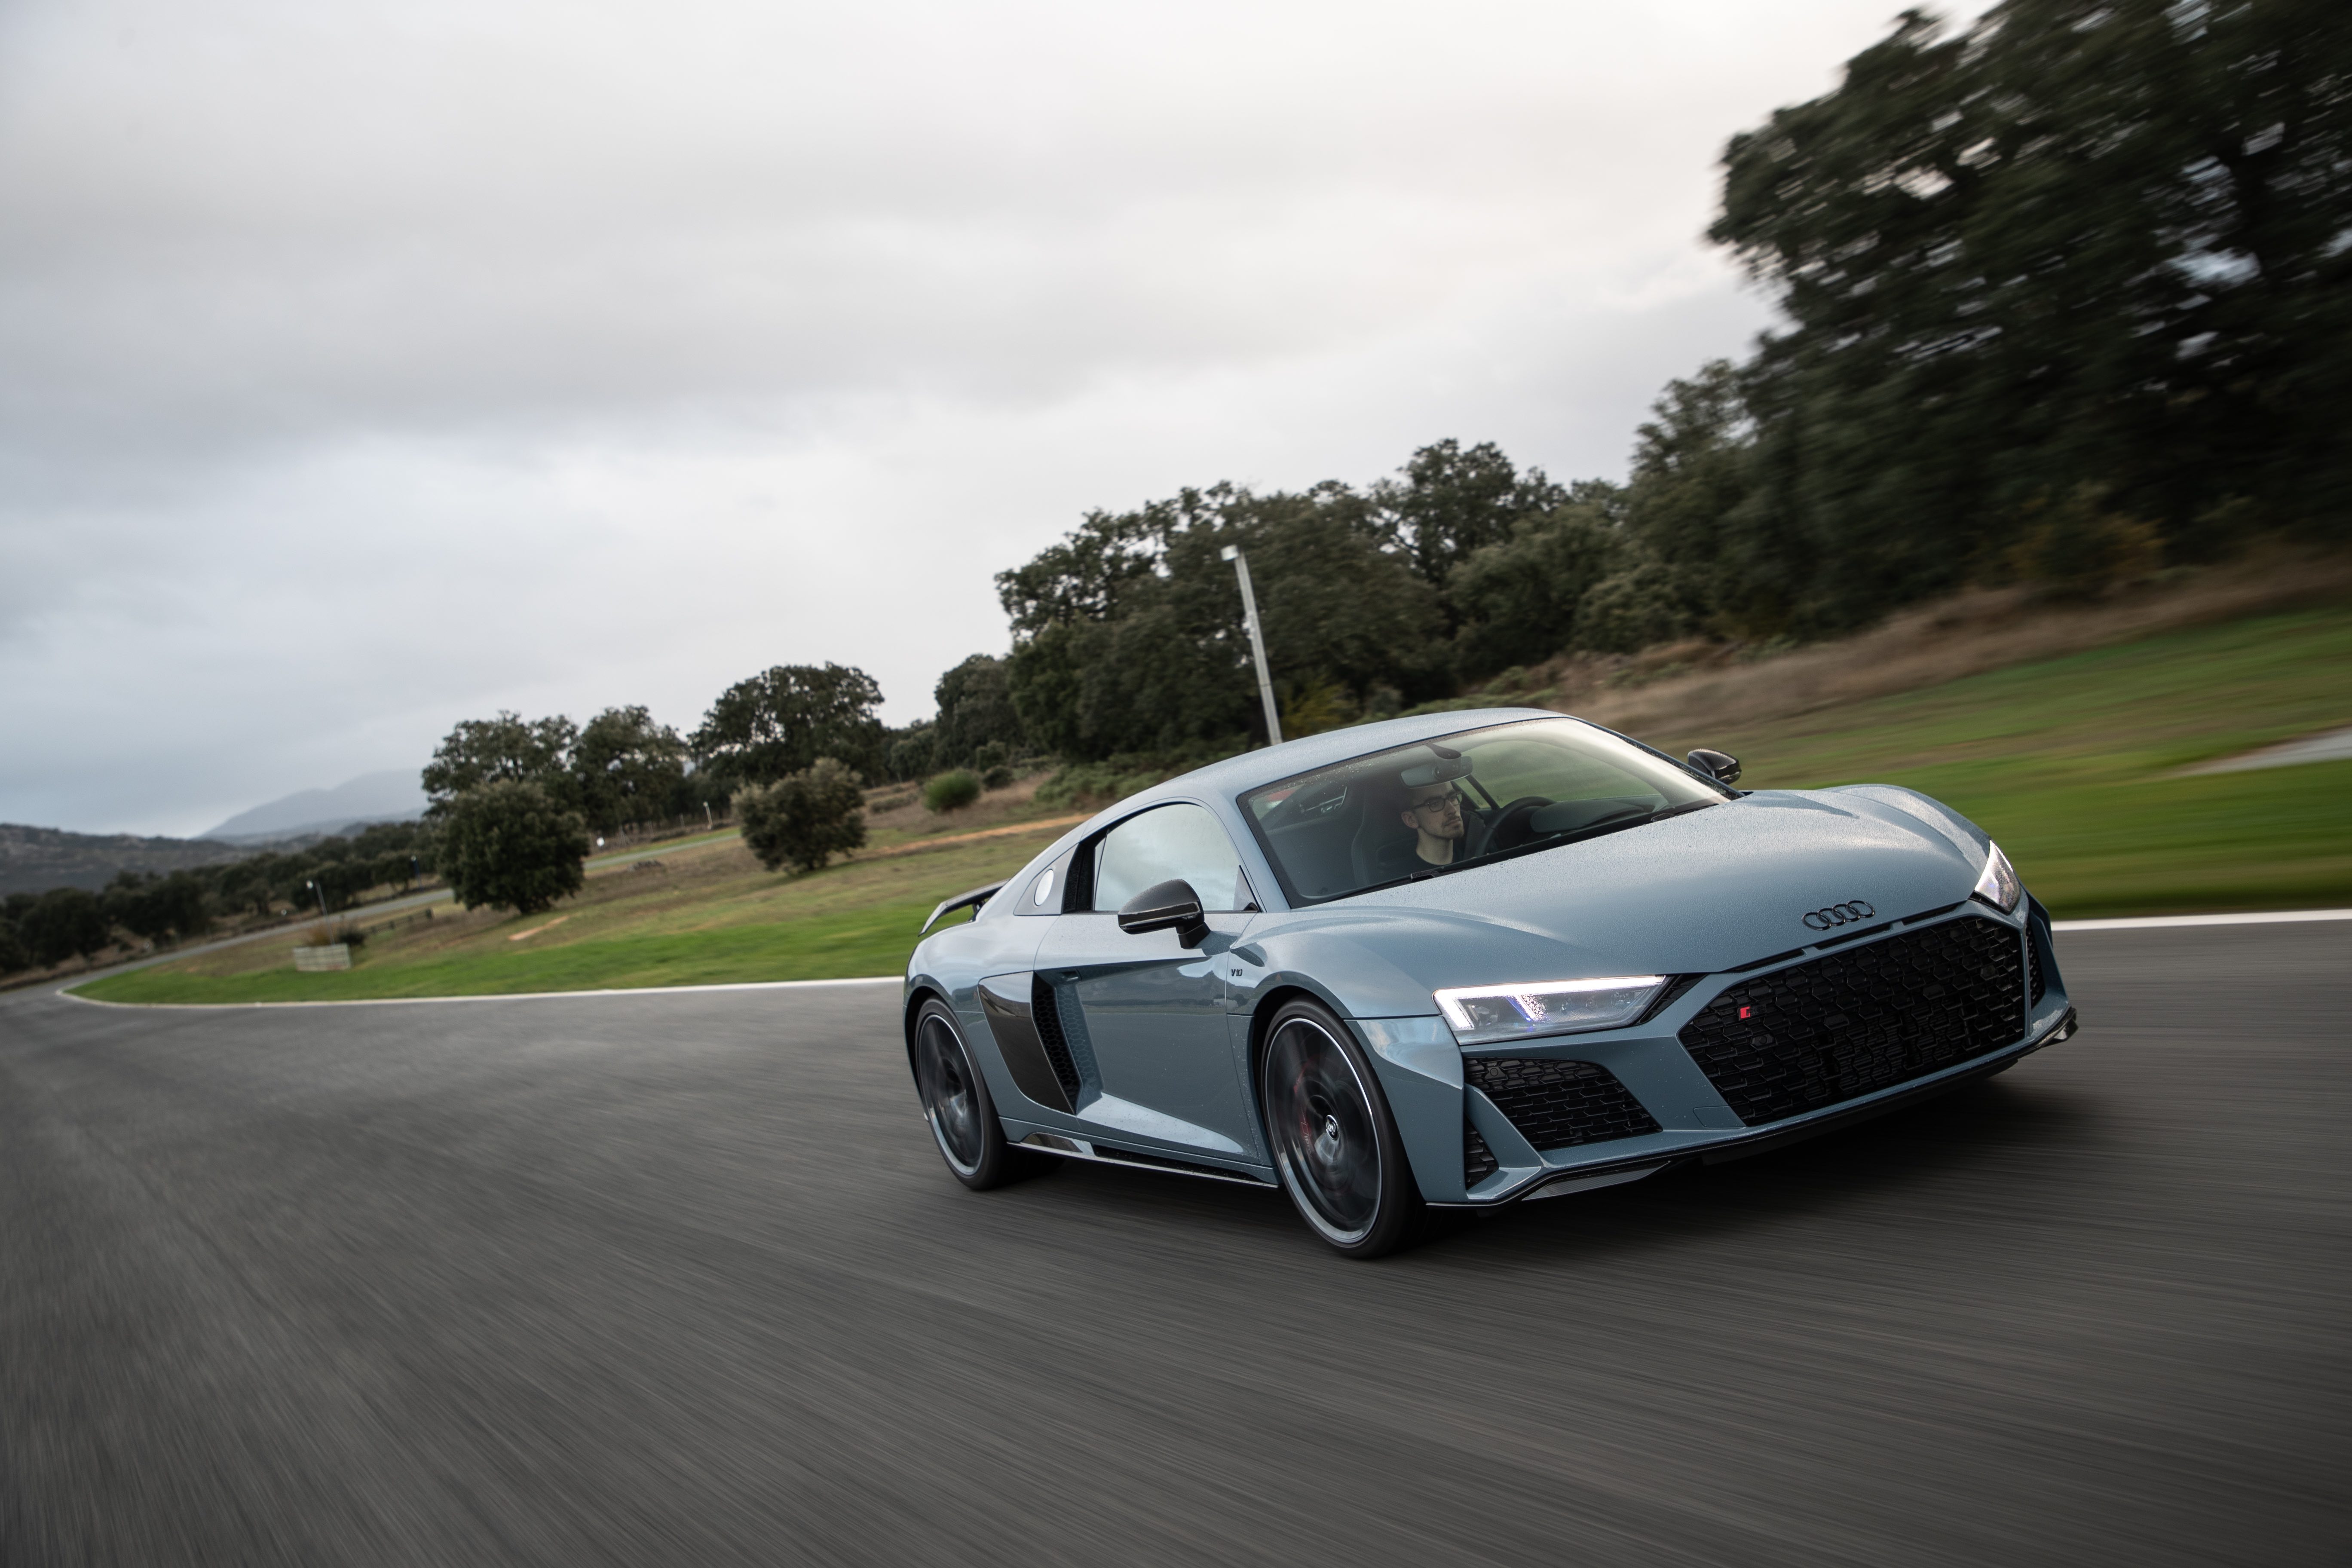 The 2019 Audi R8 Is a Low-Key Supercar